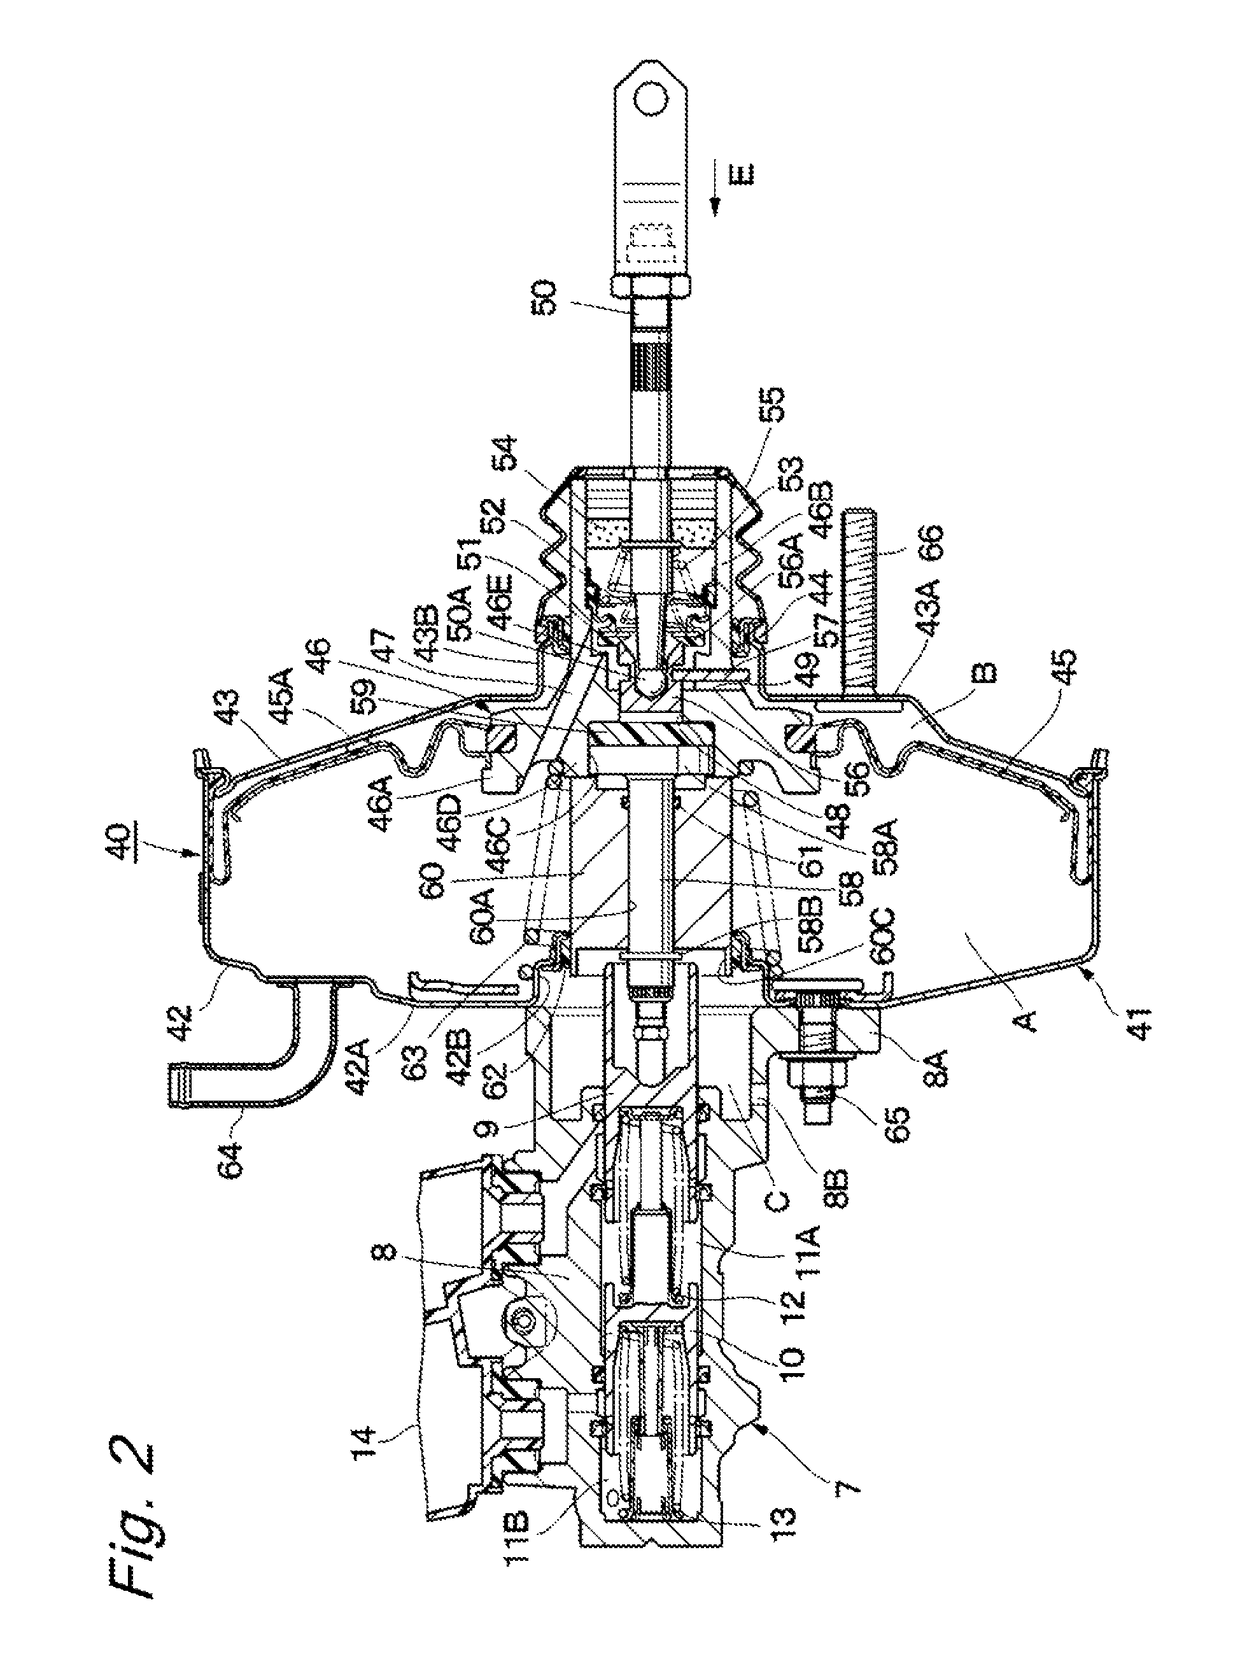 Pneumatic booster and brake system